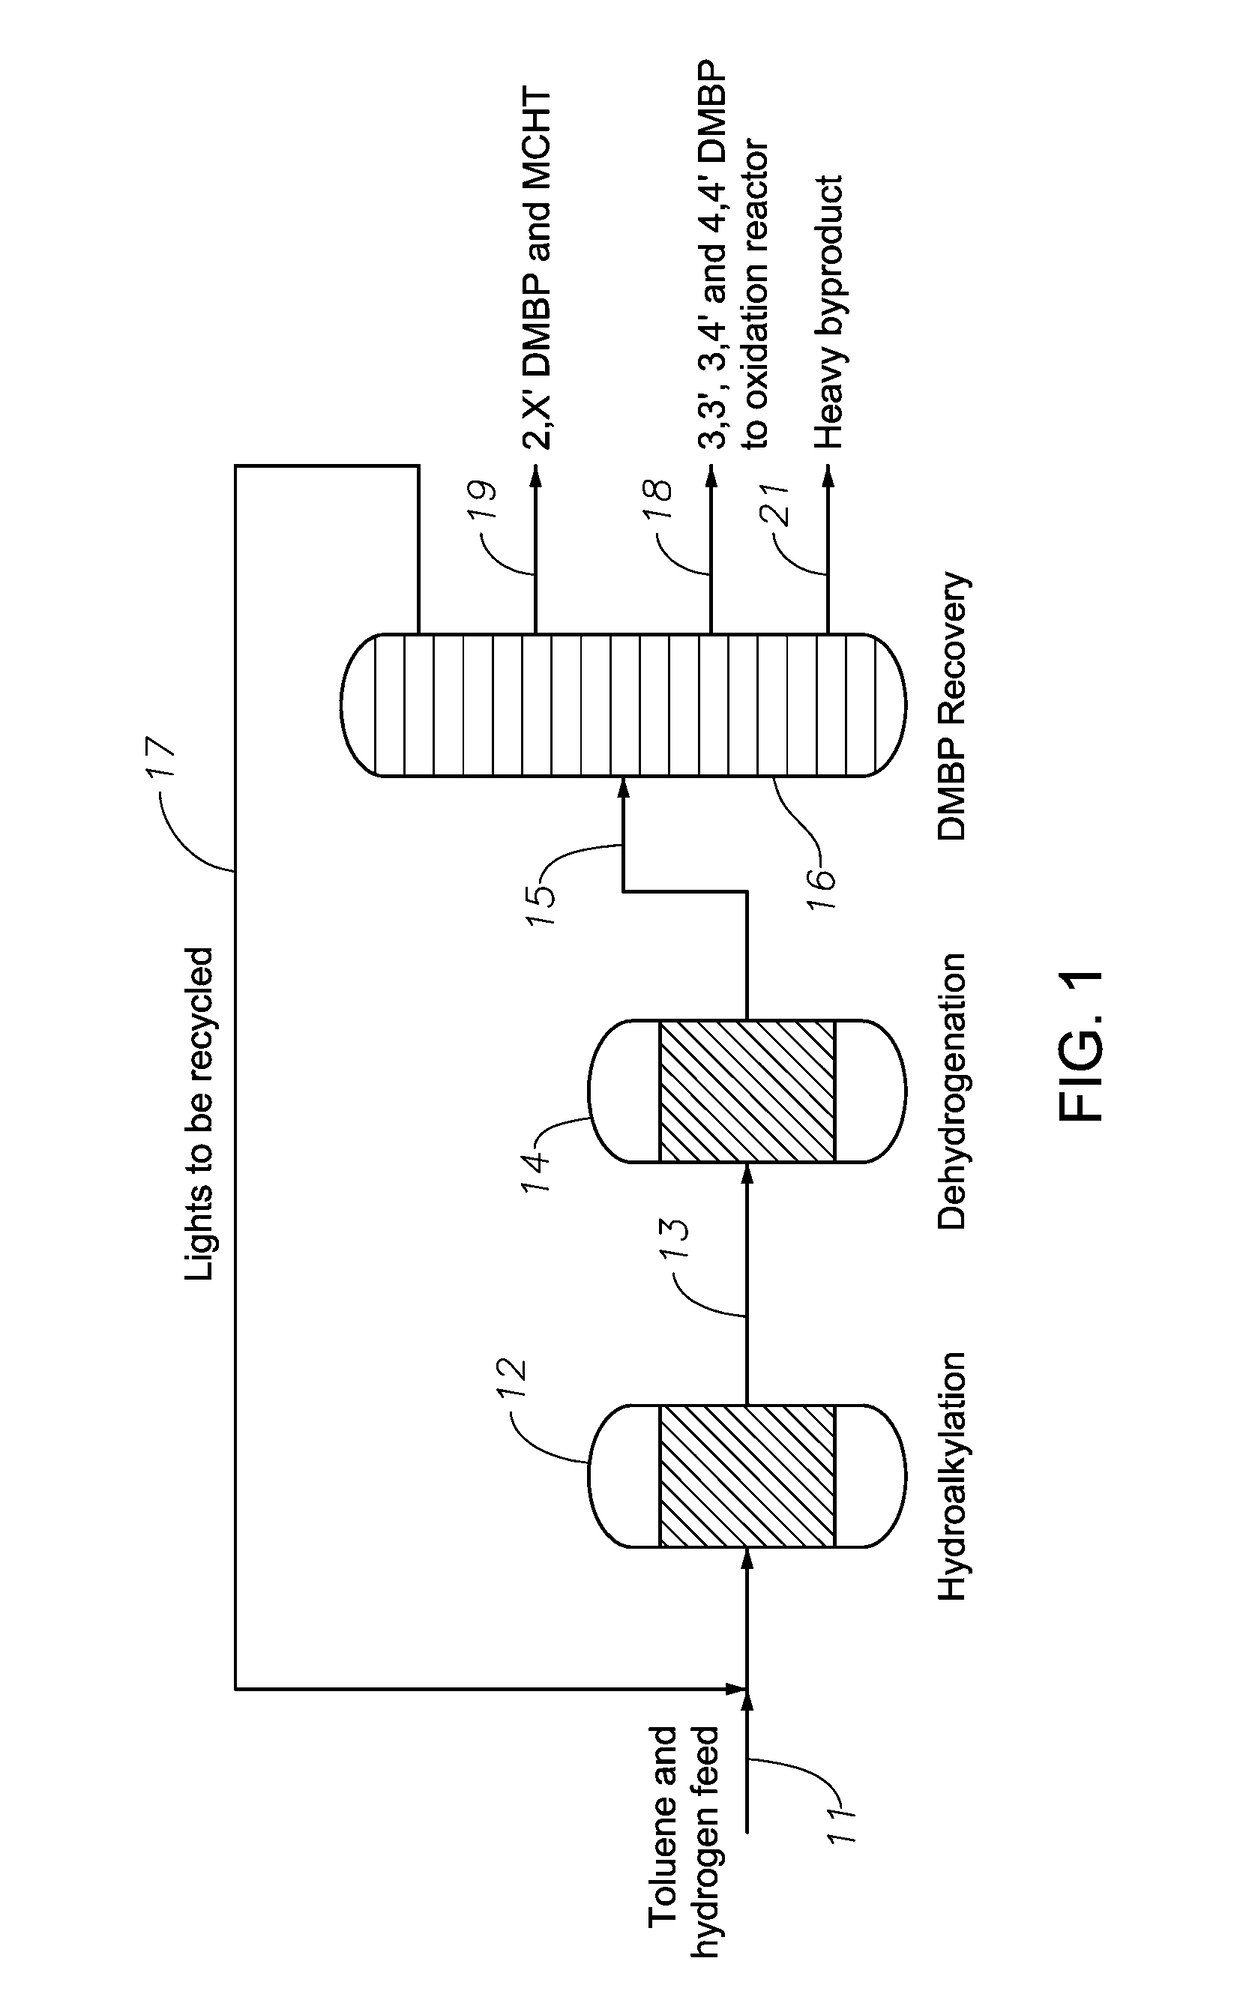 Process for preparing dialkylbiphenyl isomer mixtures